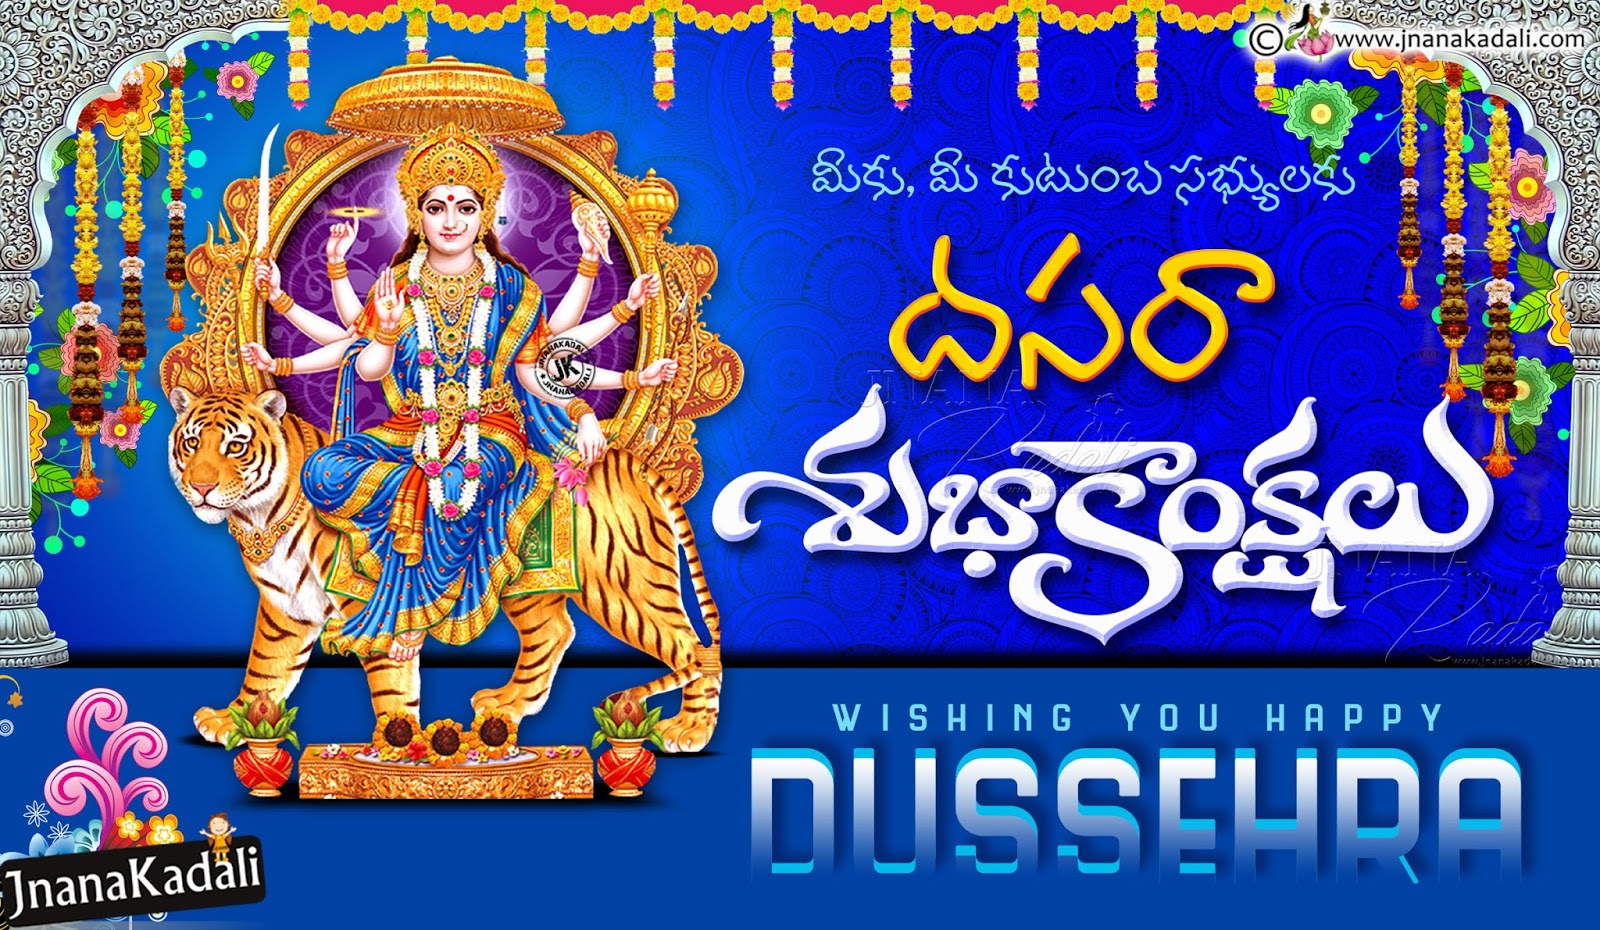 Advanced 2017 Dussehra Wishes Quotes hd Wallpapers in Telugu ...